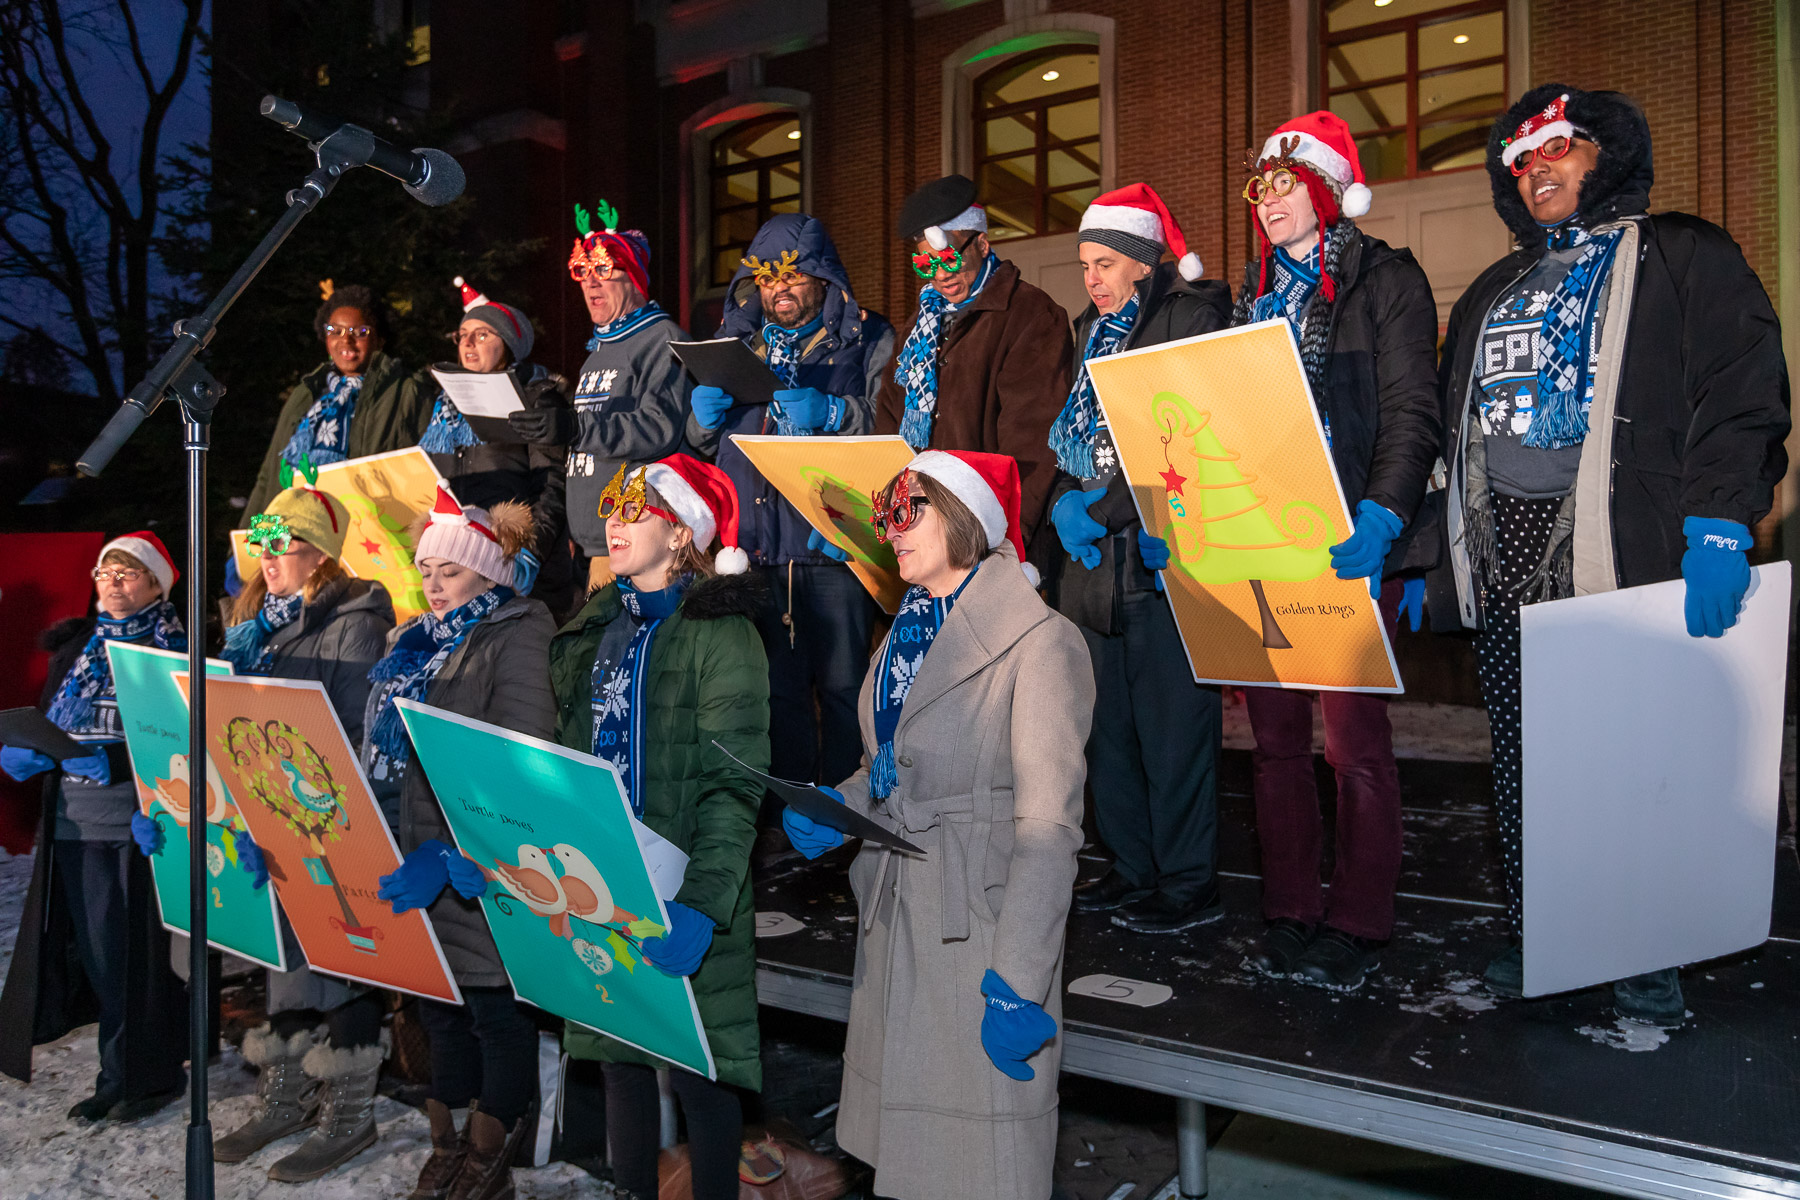 The DePaul Tree Lighting Choir, made up of DePaul staff, gave their rendition of The Twelve Days of Christmas before the tree was lit. (DePaul University/Jeff Carrion)